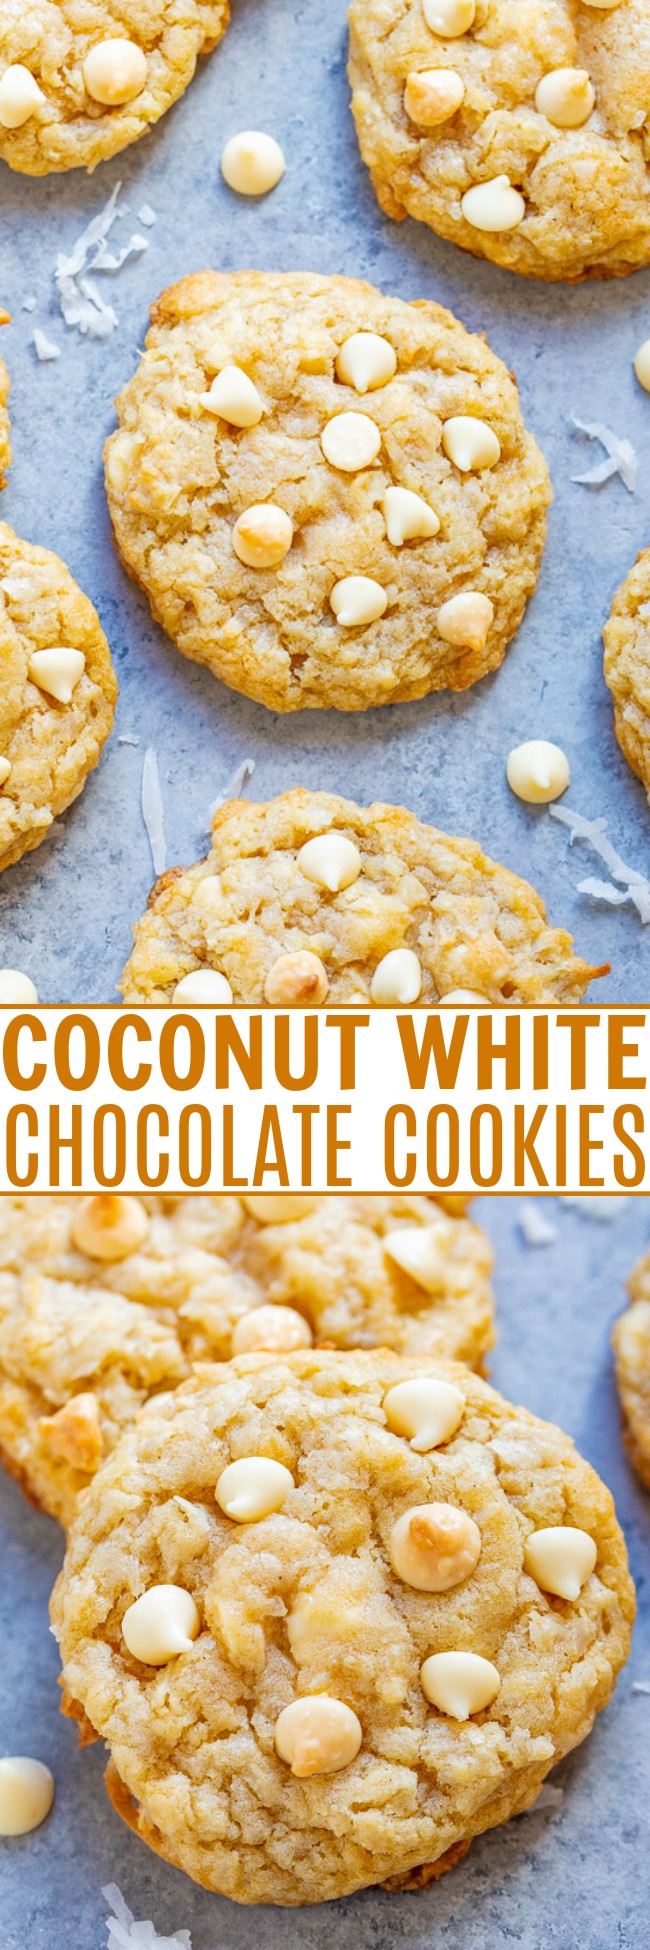 Coconut White Chocolate Chip Cookies - Soft, chewy, and so moist thanks to the coconut and browned butter with the PERFECT amount of white chocolate!! If you like white chocolate, you will LOVE these spring and summery-tasting EASY cookies!!